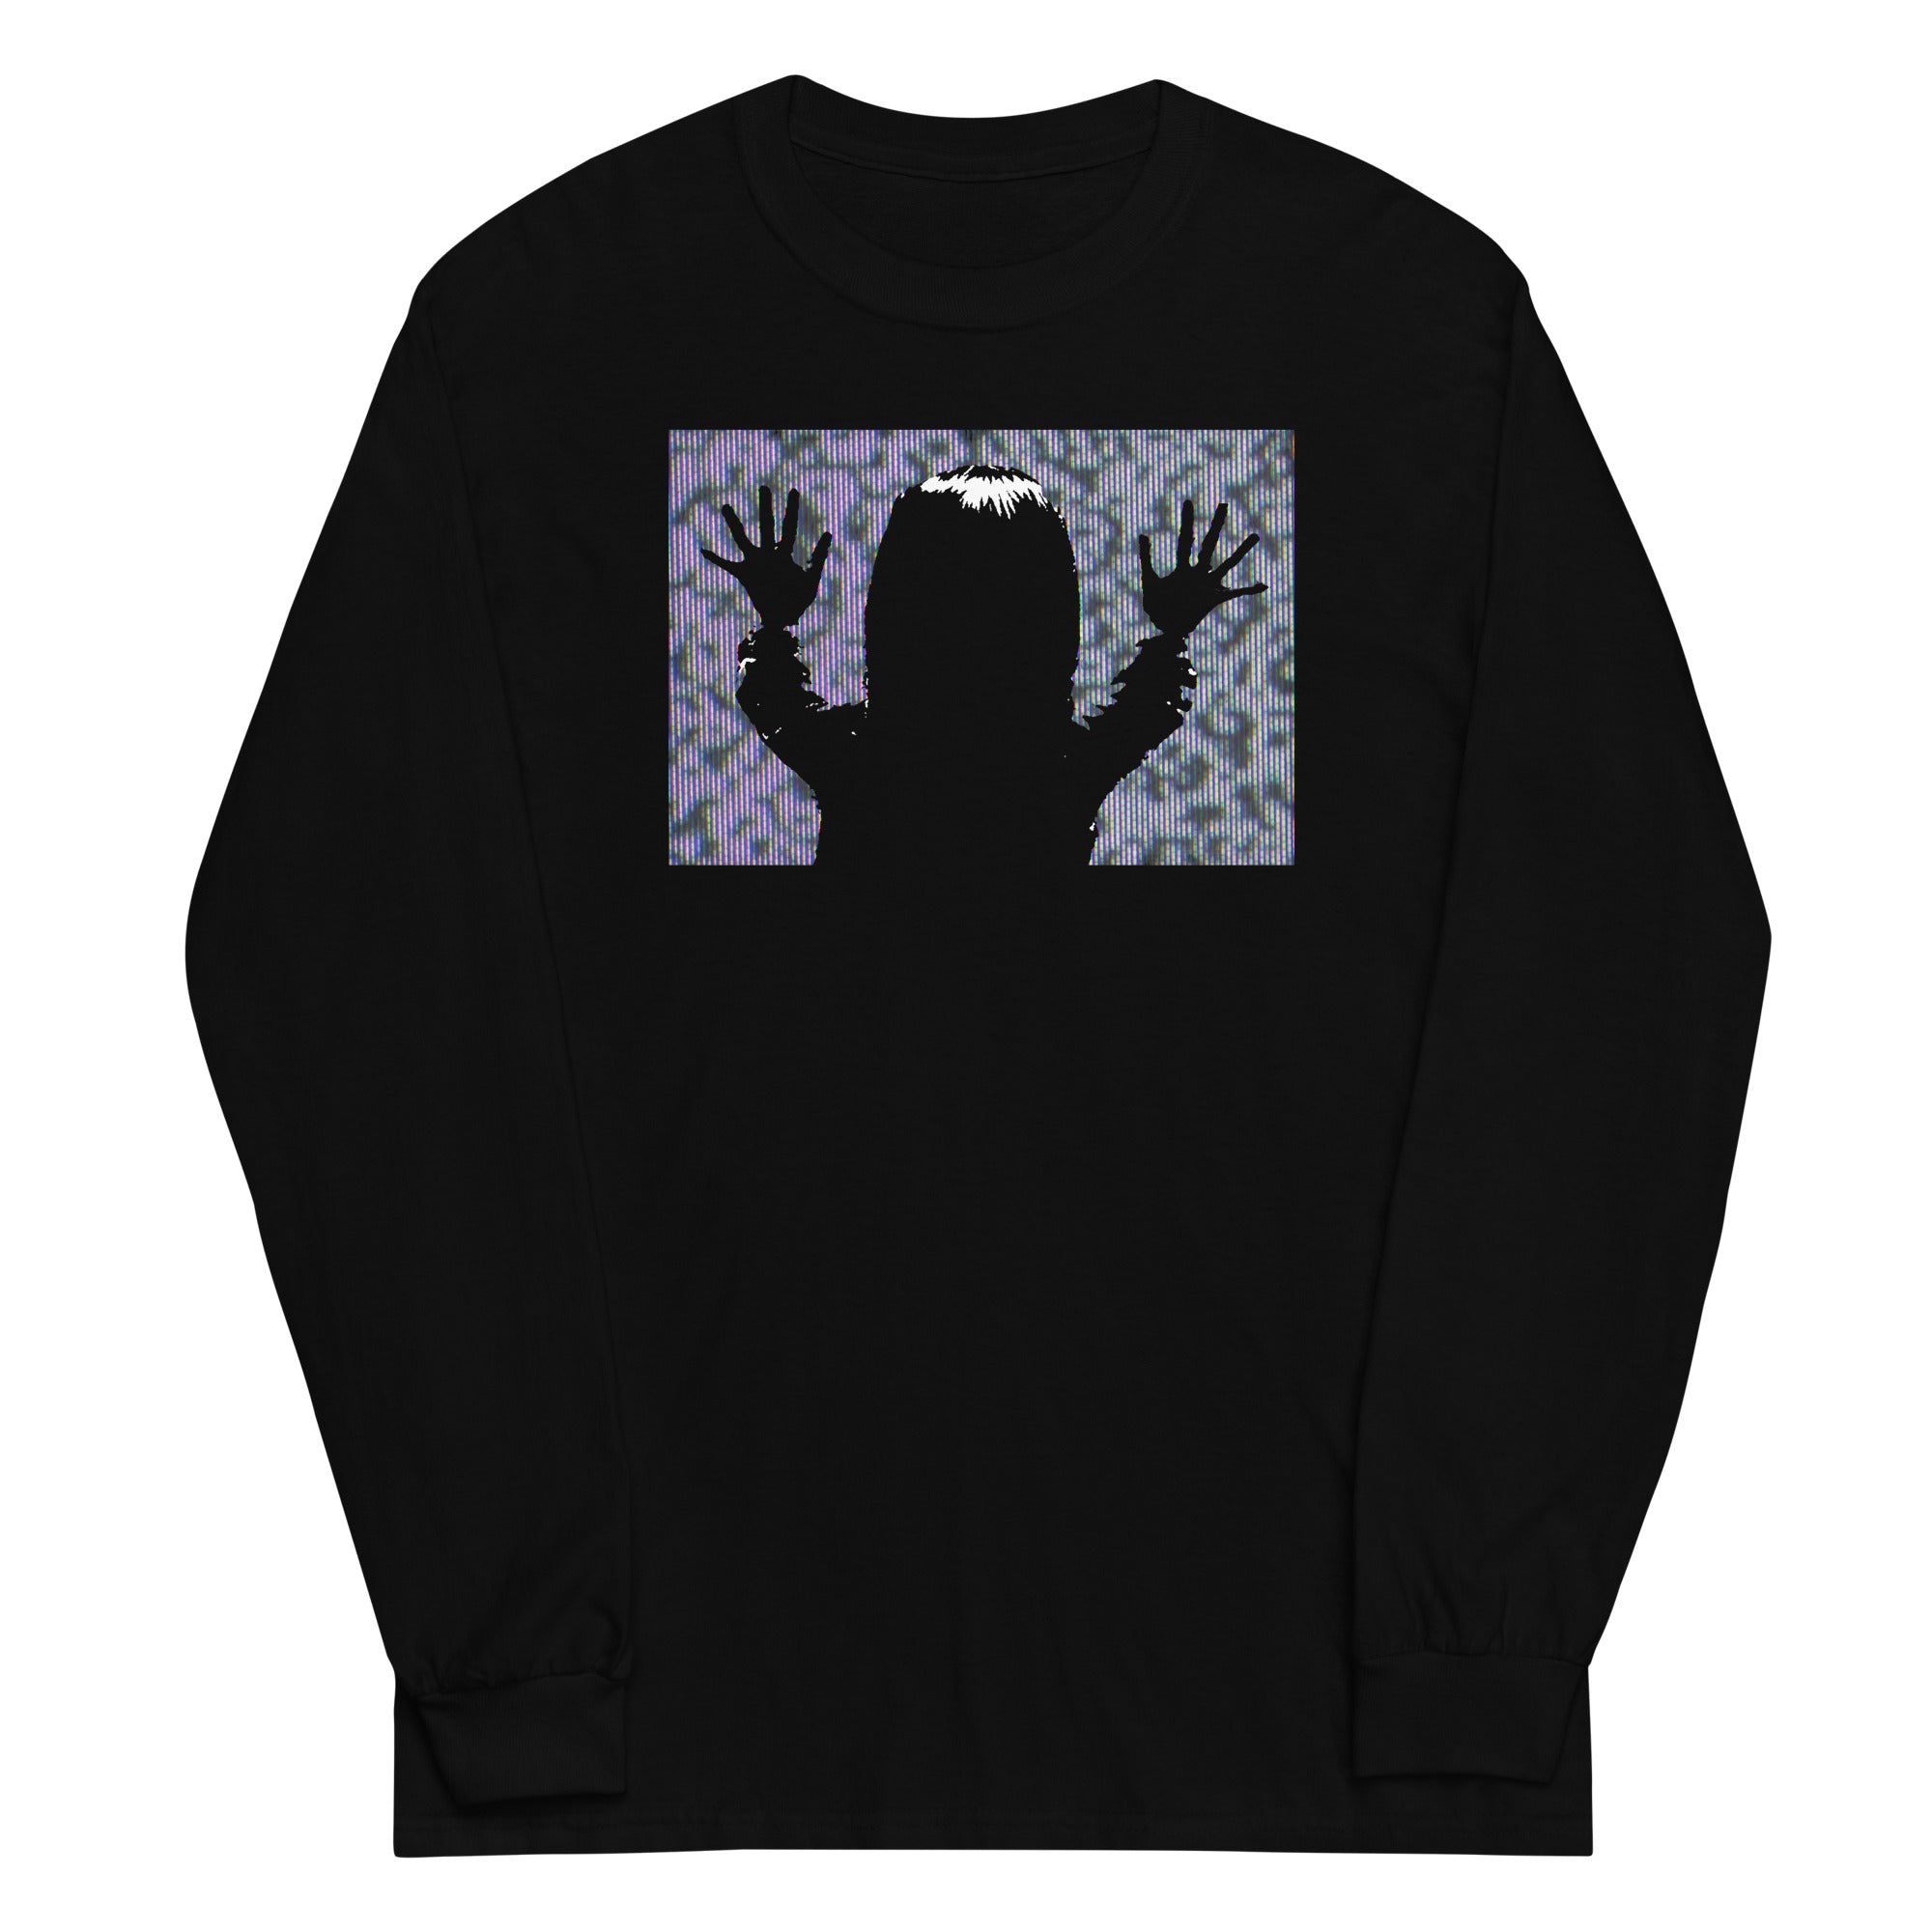 "They're Here" Carol Anne Poltergeist Long Sleeve Shirt